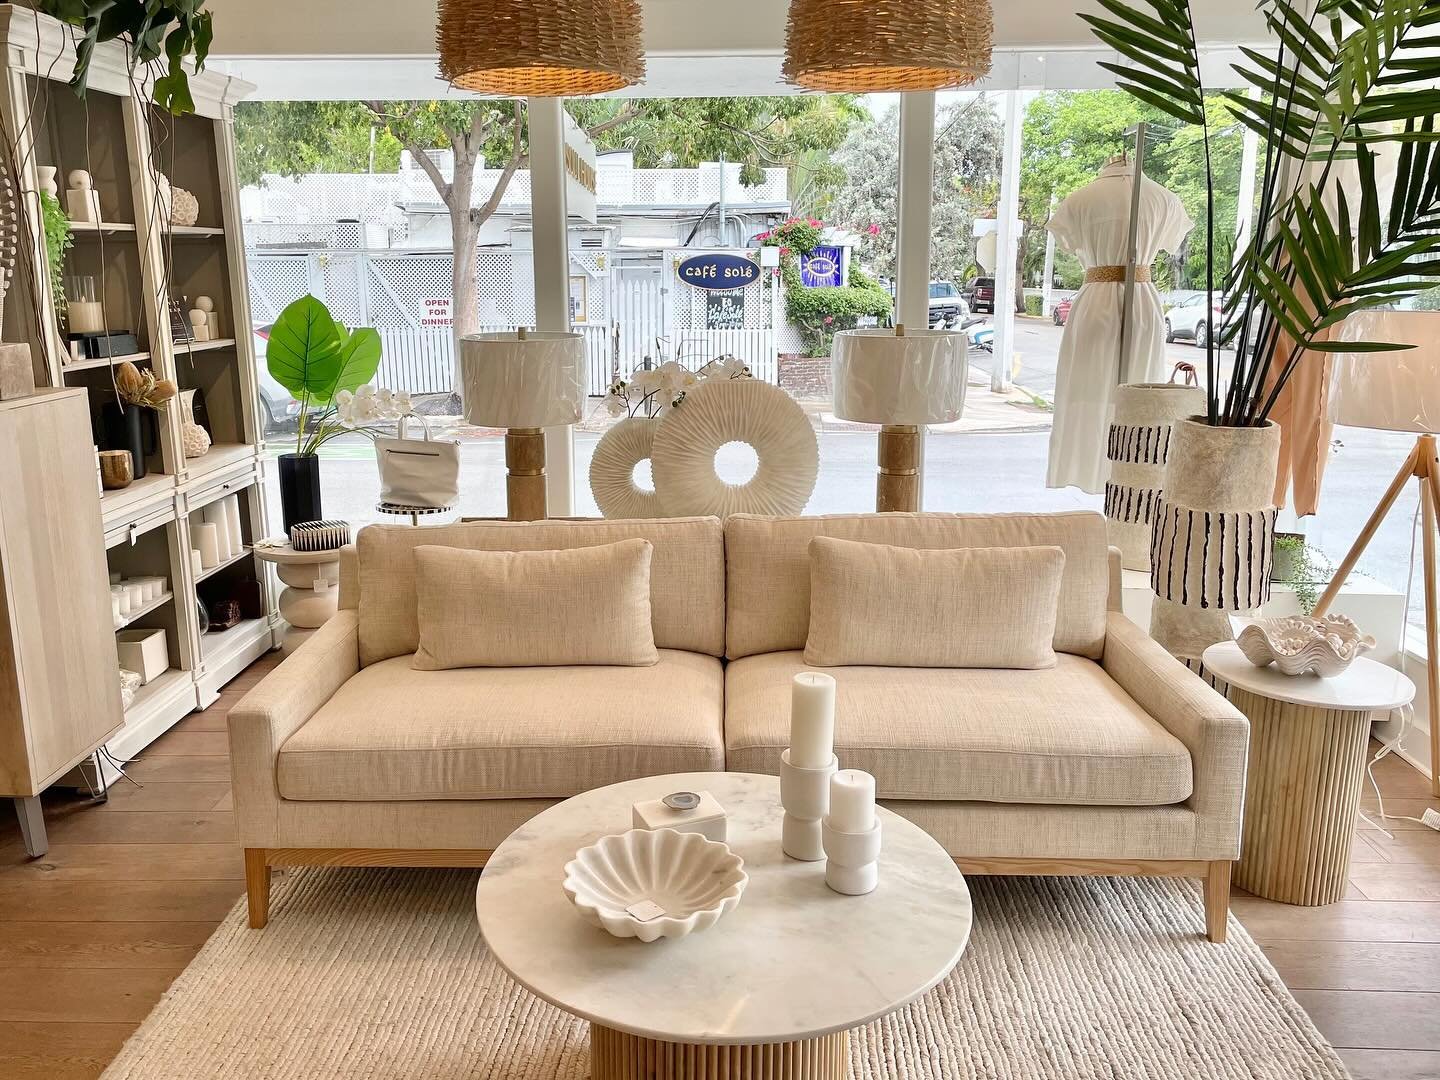 Come in today and see our newest furniture finds!

Transform your space into a soulful sanctuary with the modern elegance of our cozy upholstered sofa. 

#HomeSanctuary #ModernElegance #islandlife #soulhouse #soulhousekeywest
#shoplocal #retailkeywes